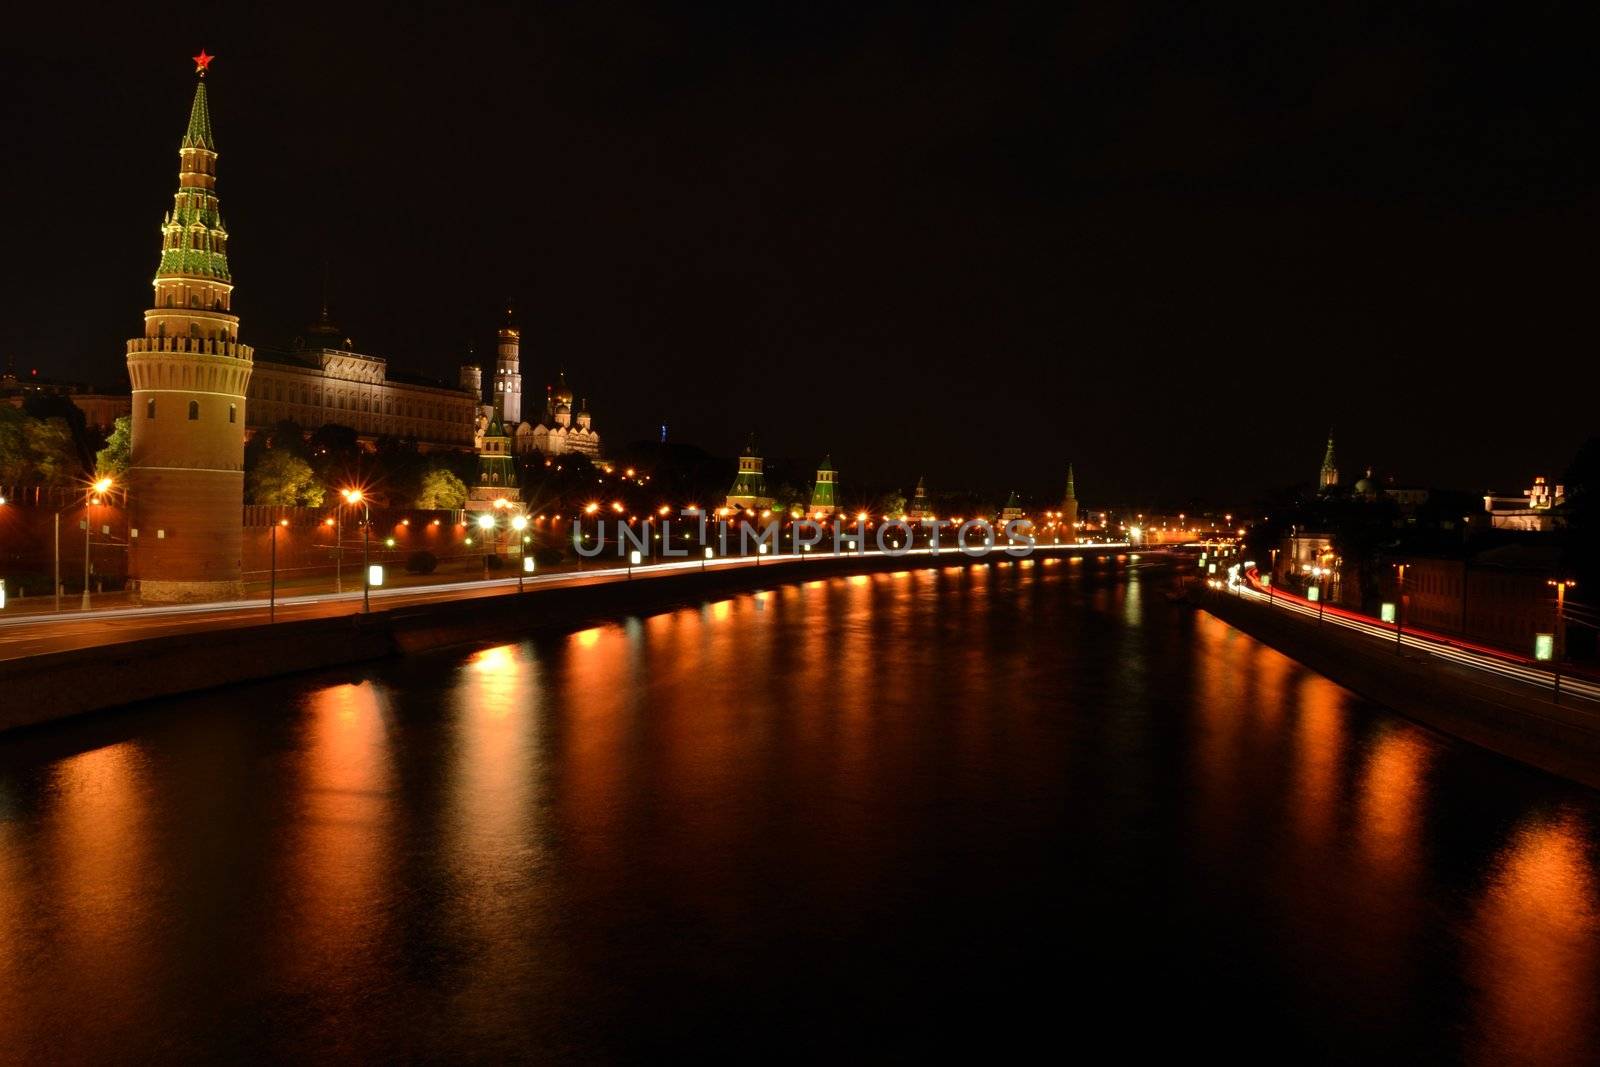 Moscow night view by Autre